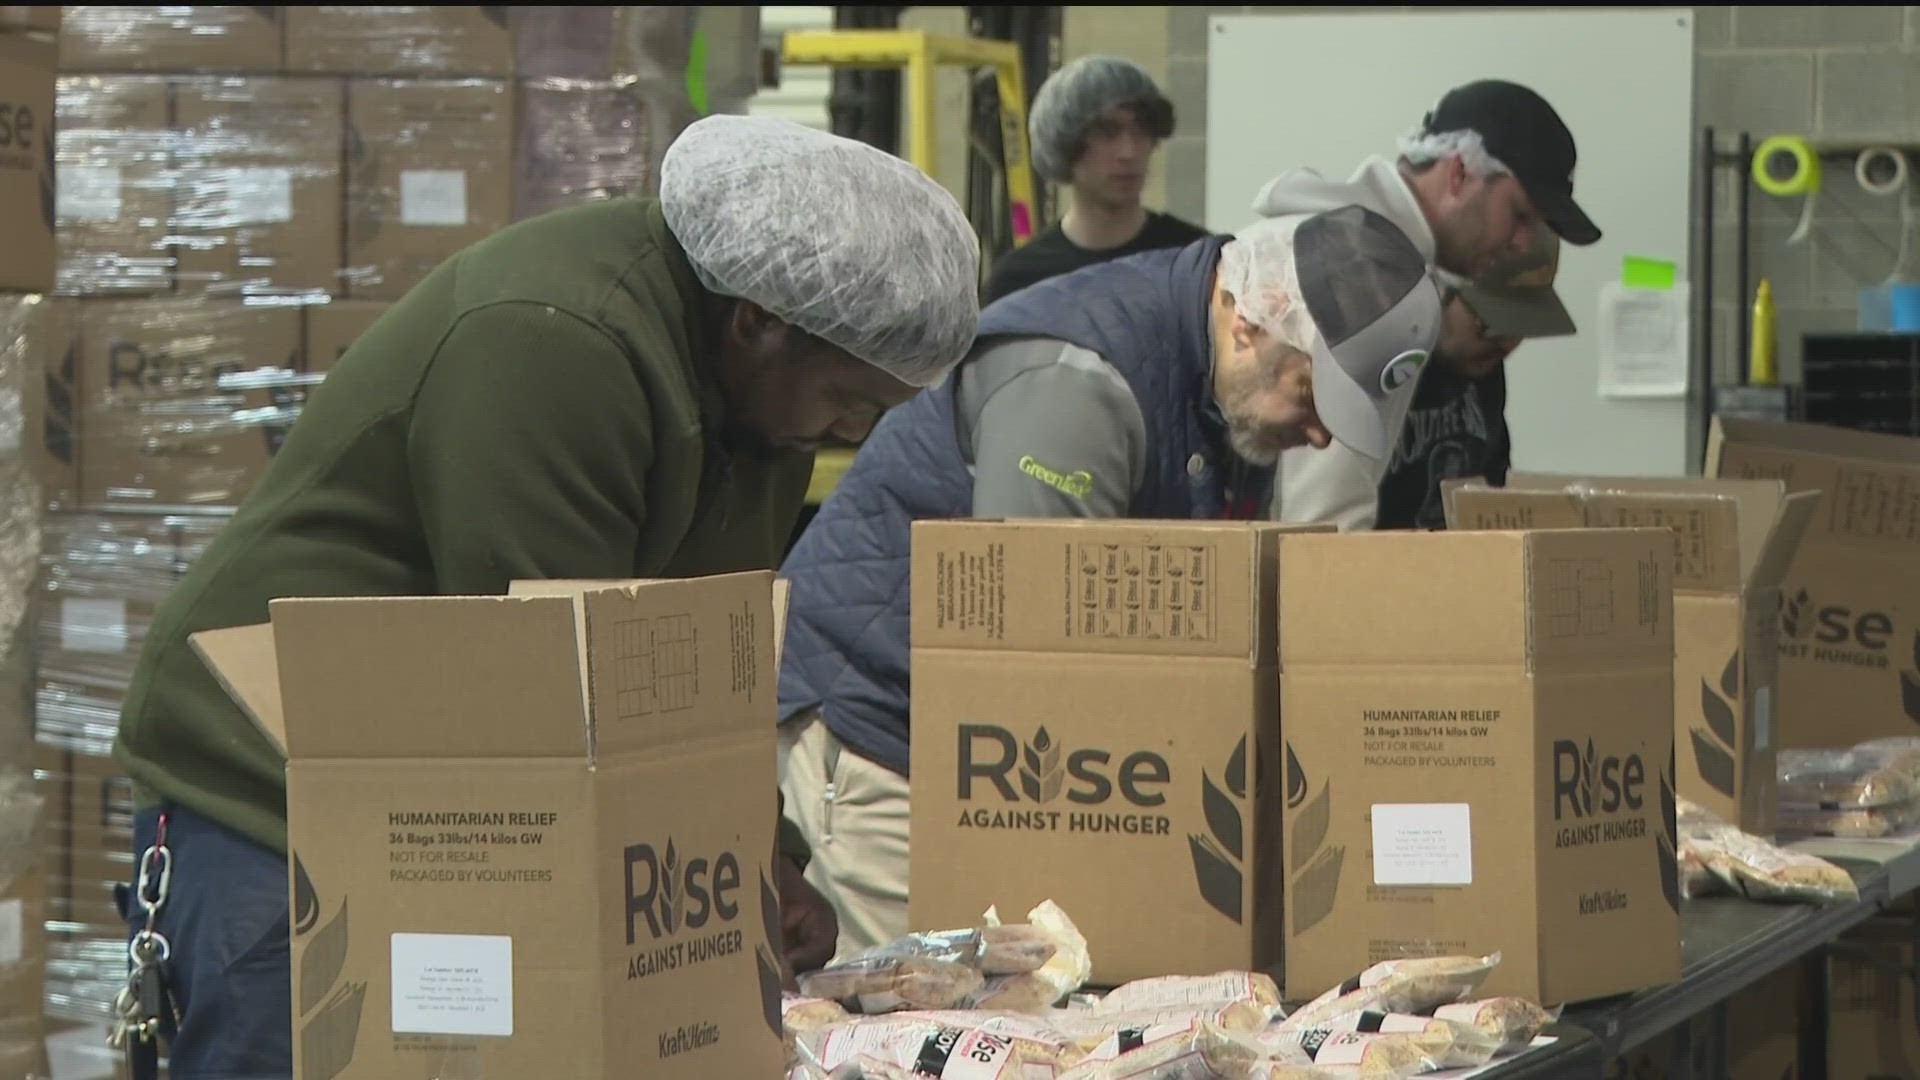 Over 10,000 meals were packaged to benefit people affected by food insecurity.